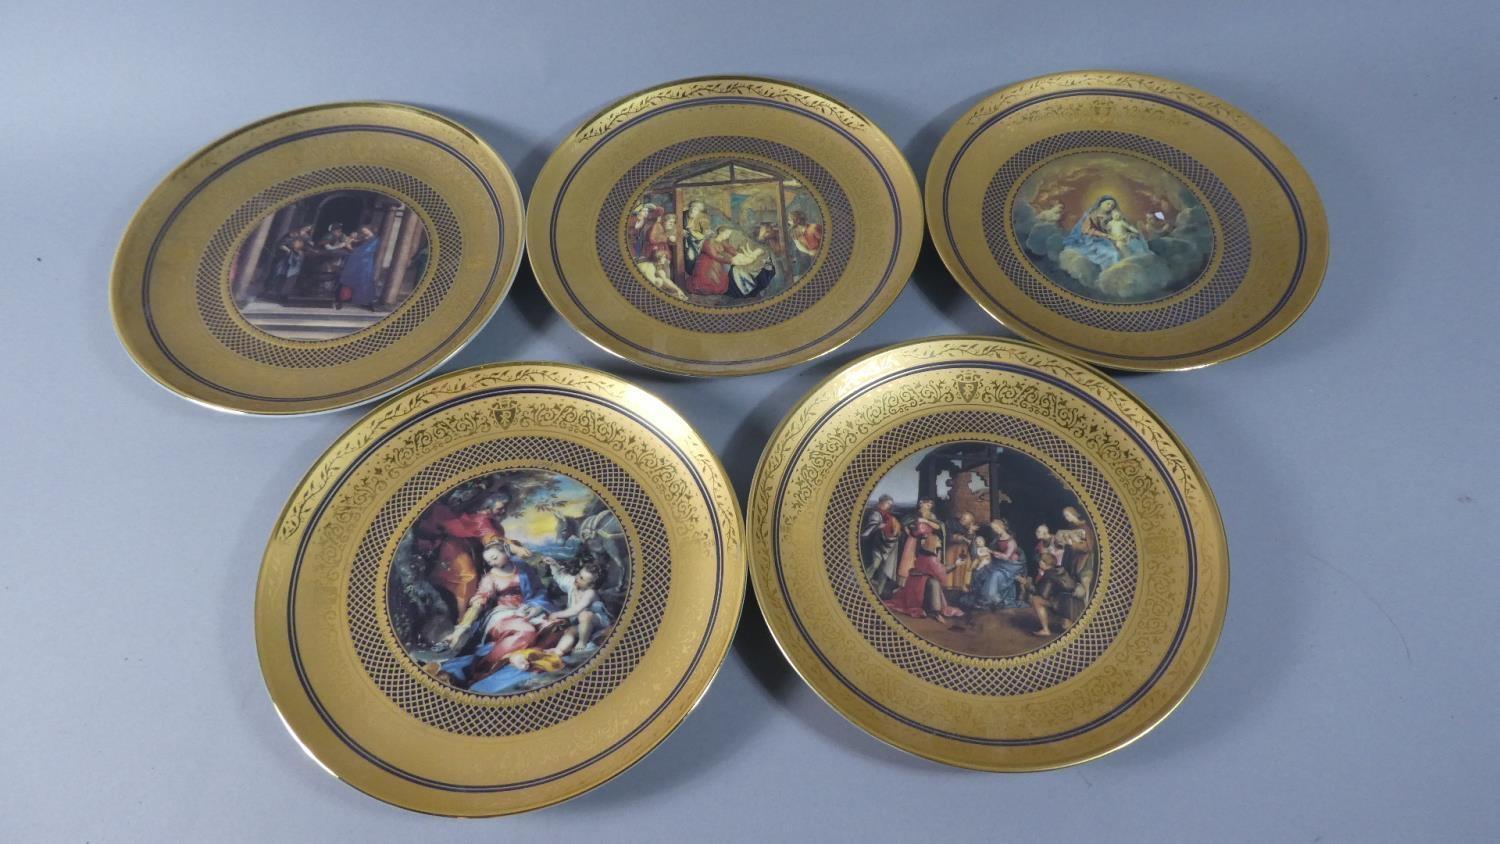 A Collection of Five Franklin Mint 'The History of Christ in Art' Porcelain Plates, Hand Numbered - Image 7 of 7